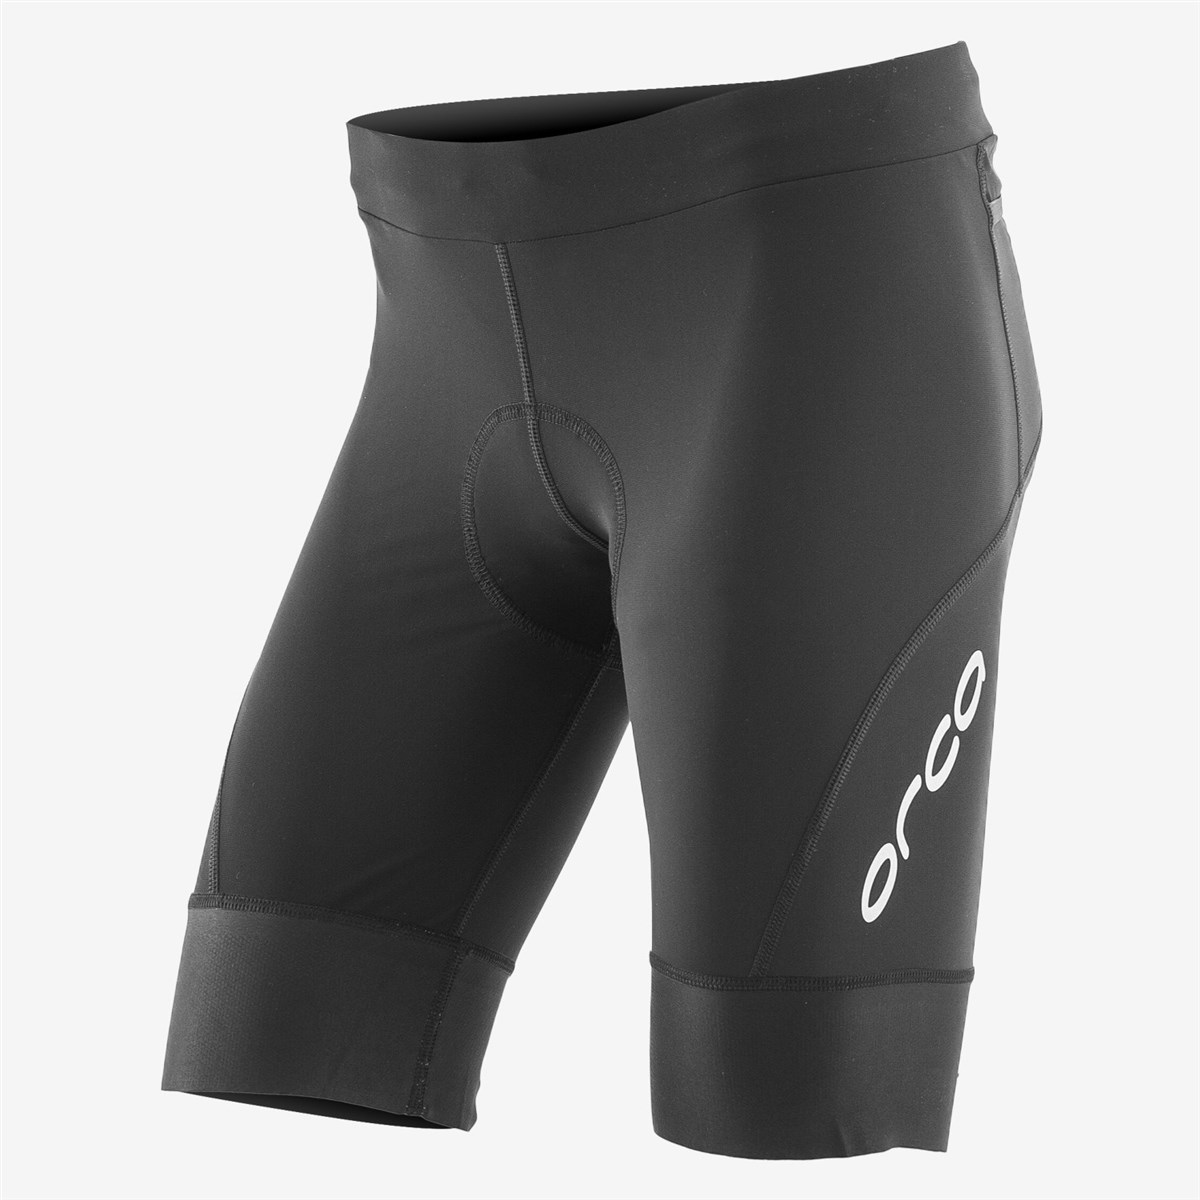 Orca 226 Womens Tri Shorts product image